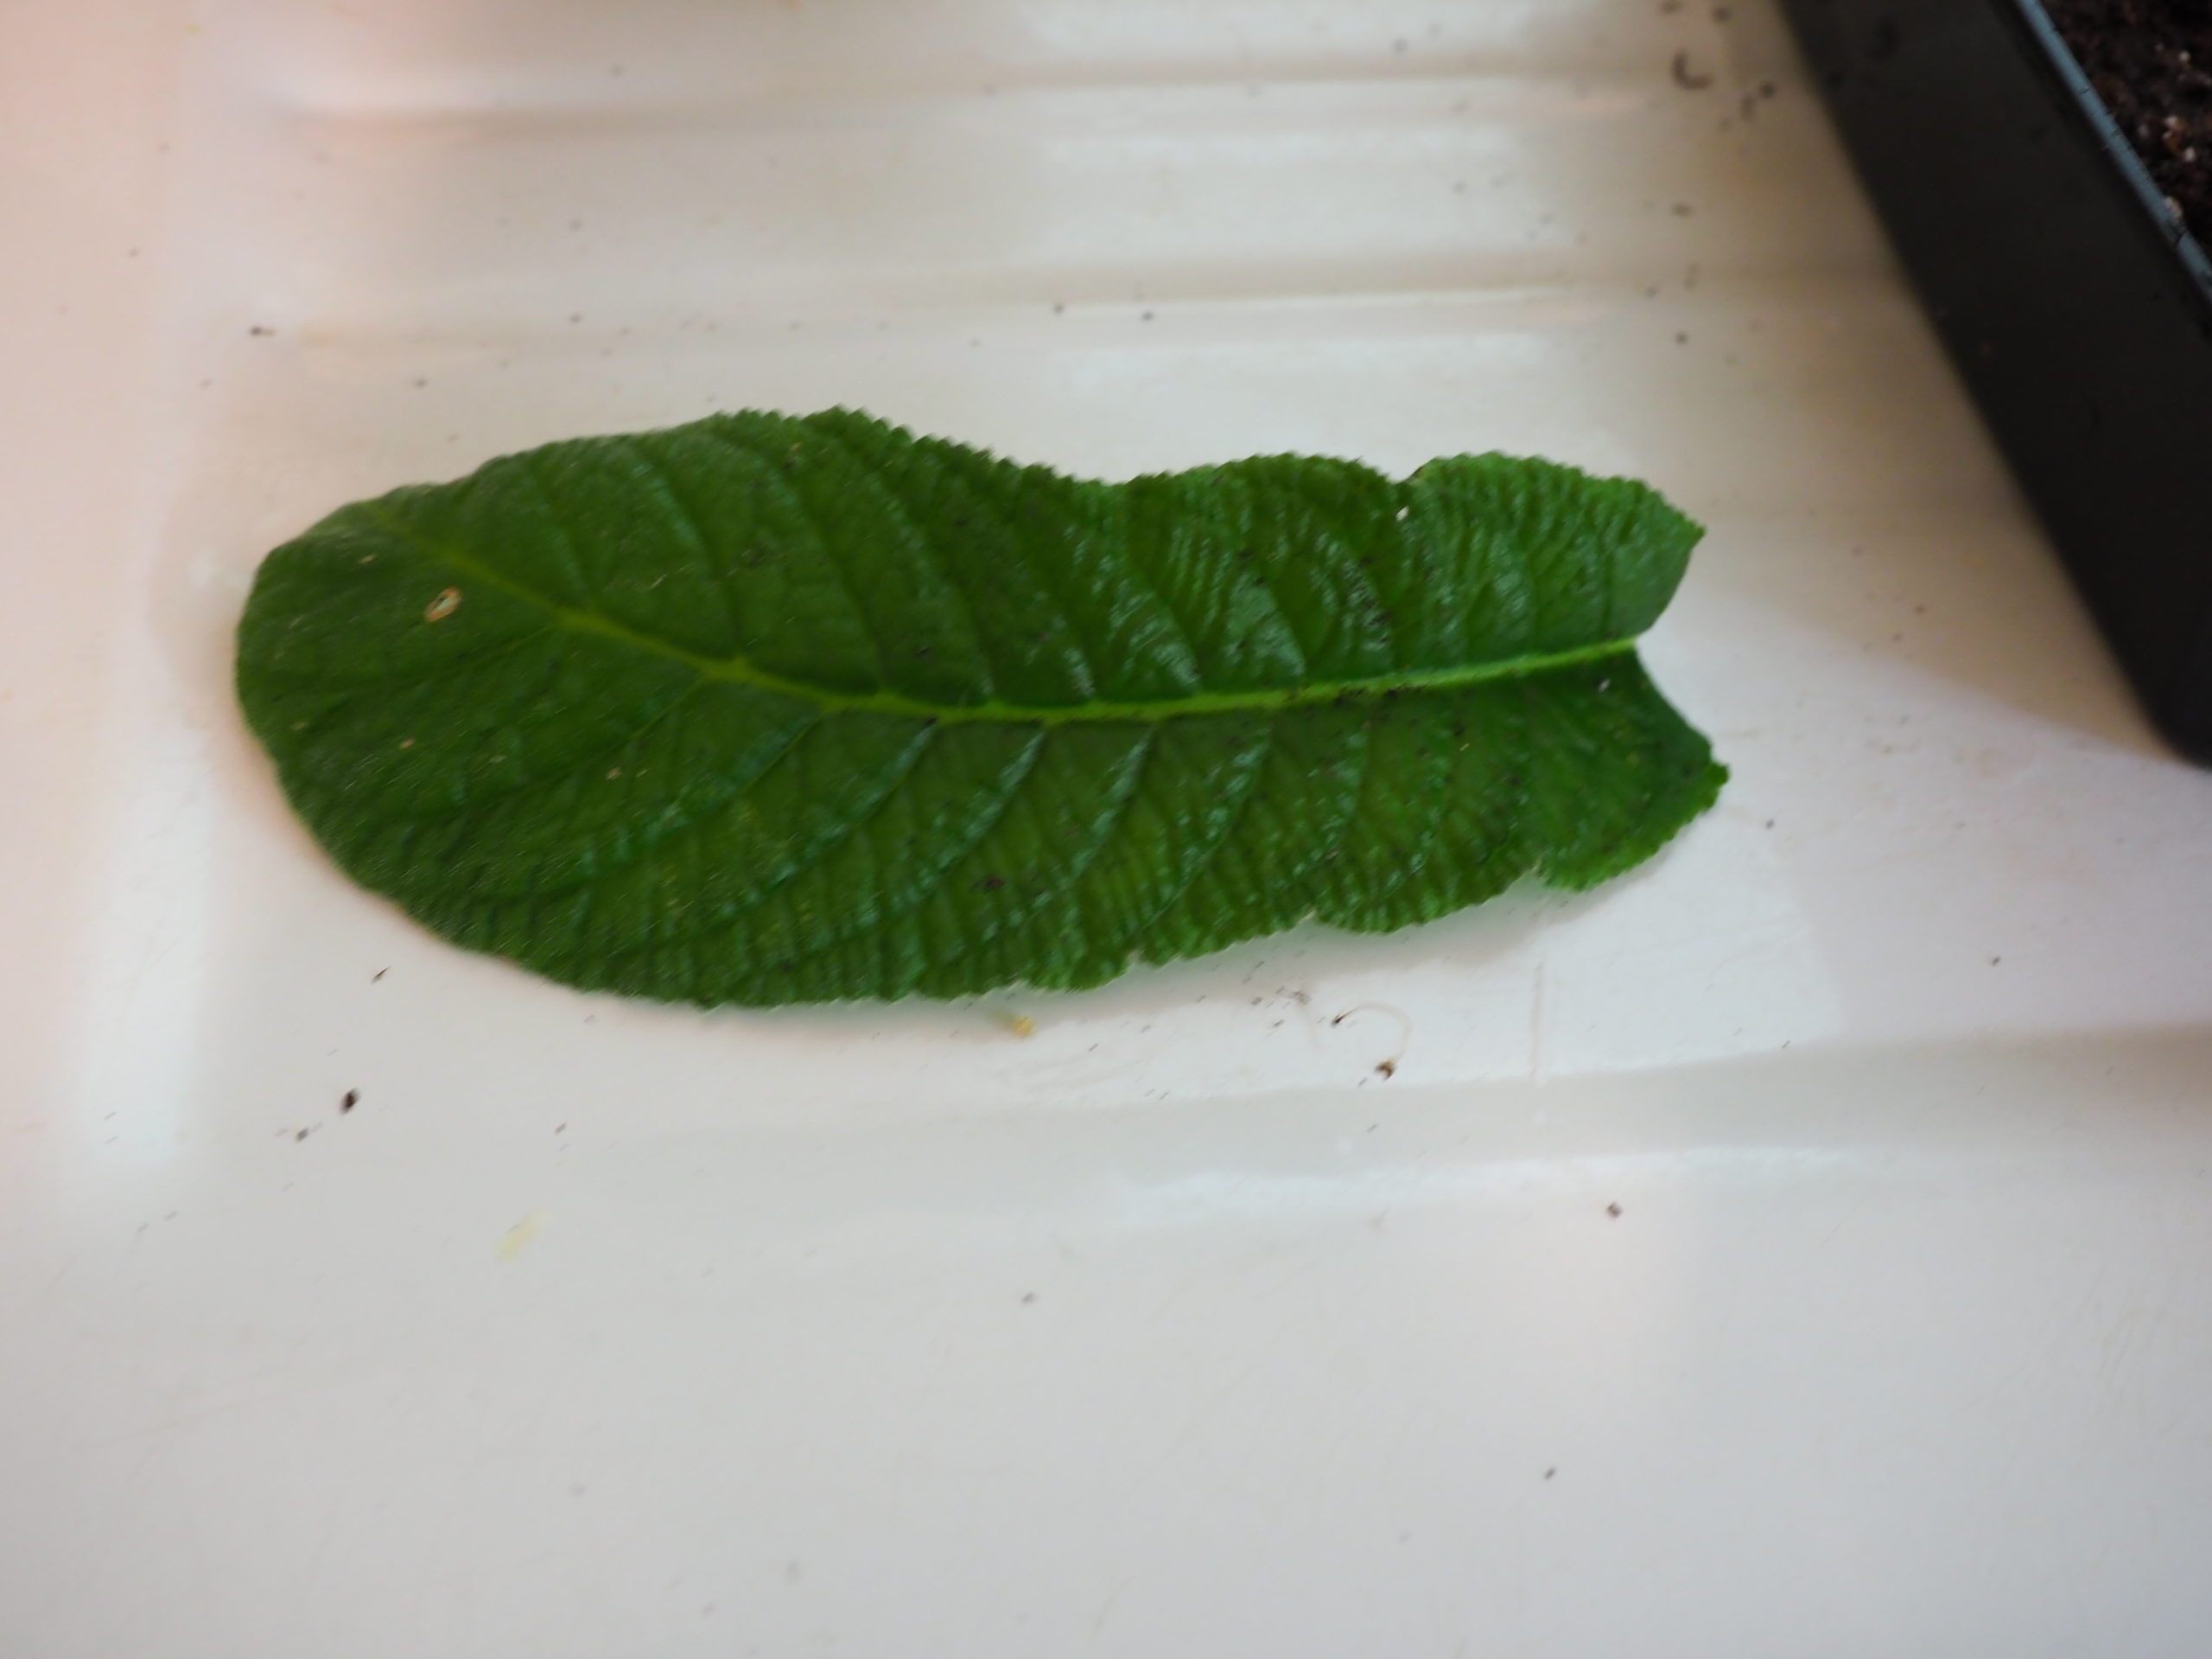 This strep leaf has been removed from the parent by cutting at the center of the rosette to remove the single leaf.